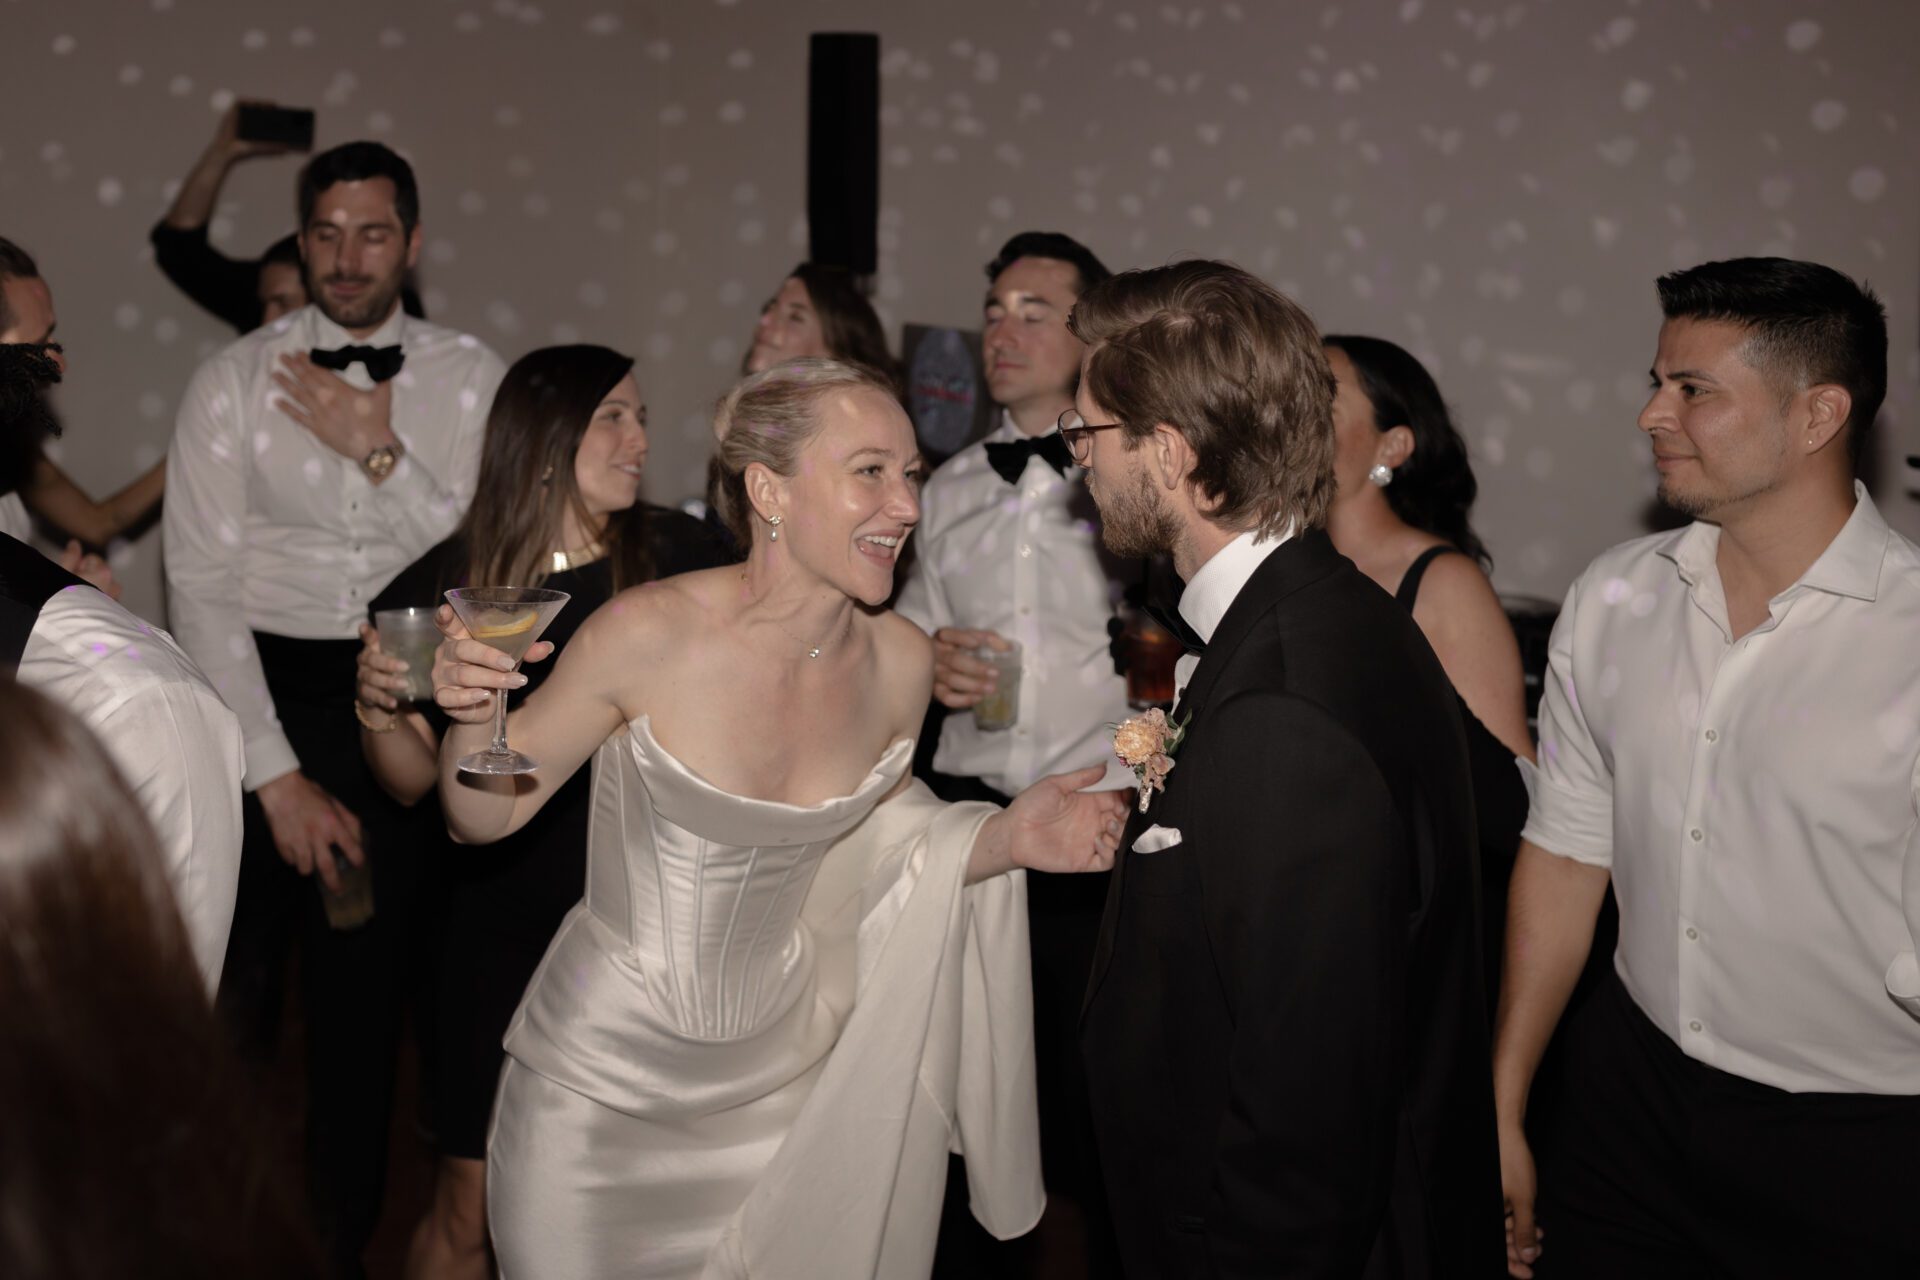 Guests enjoy the afterparty at the luxury Italian wedding